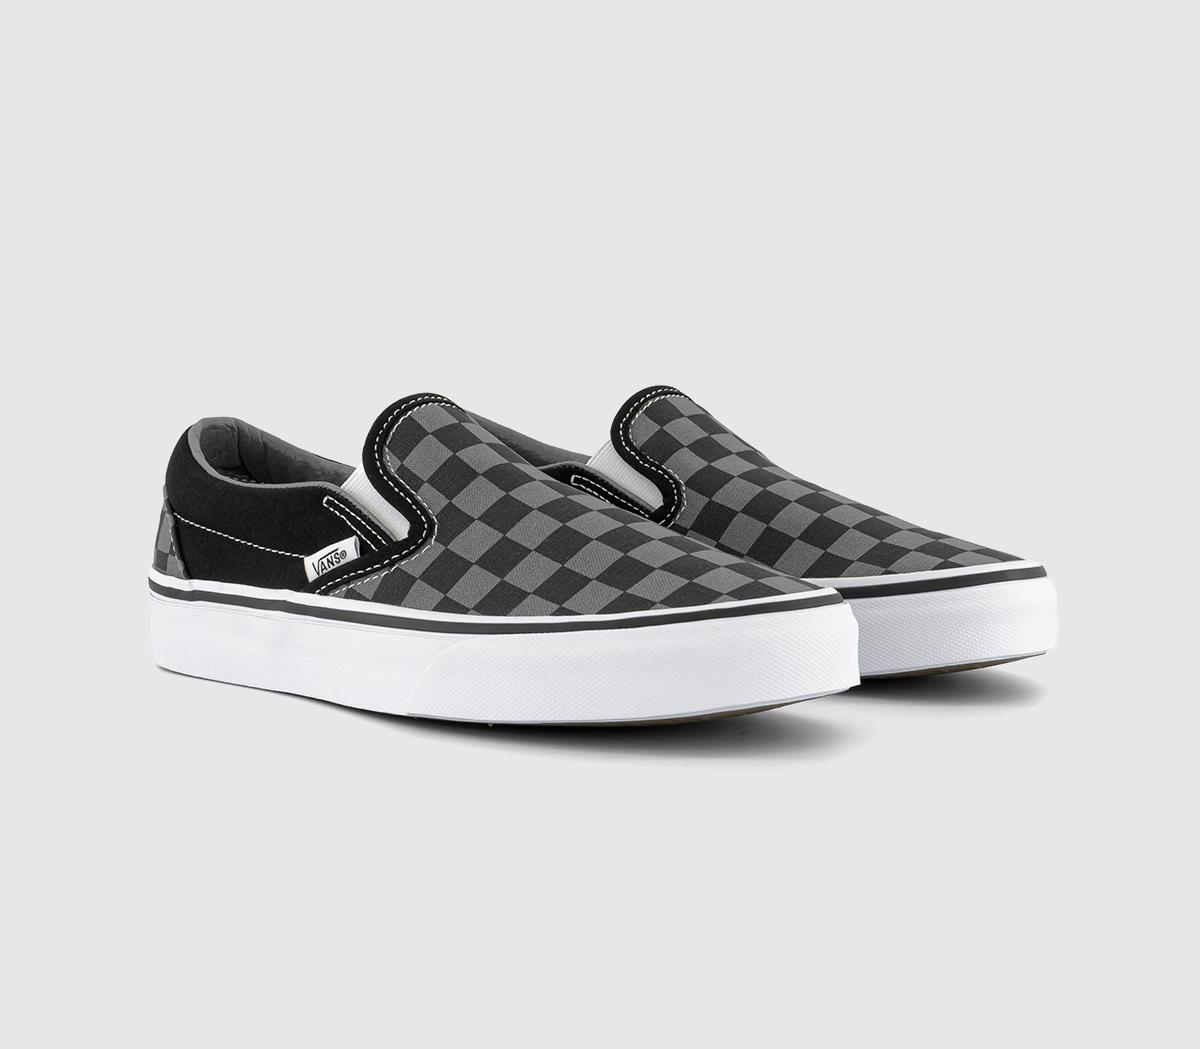 Vans Classic Slip On Trainers Black Pewter Check Black/Grey, 12